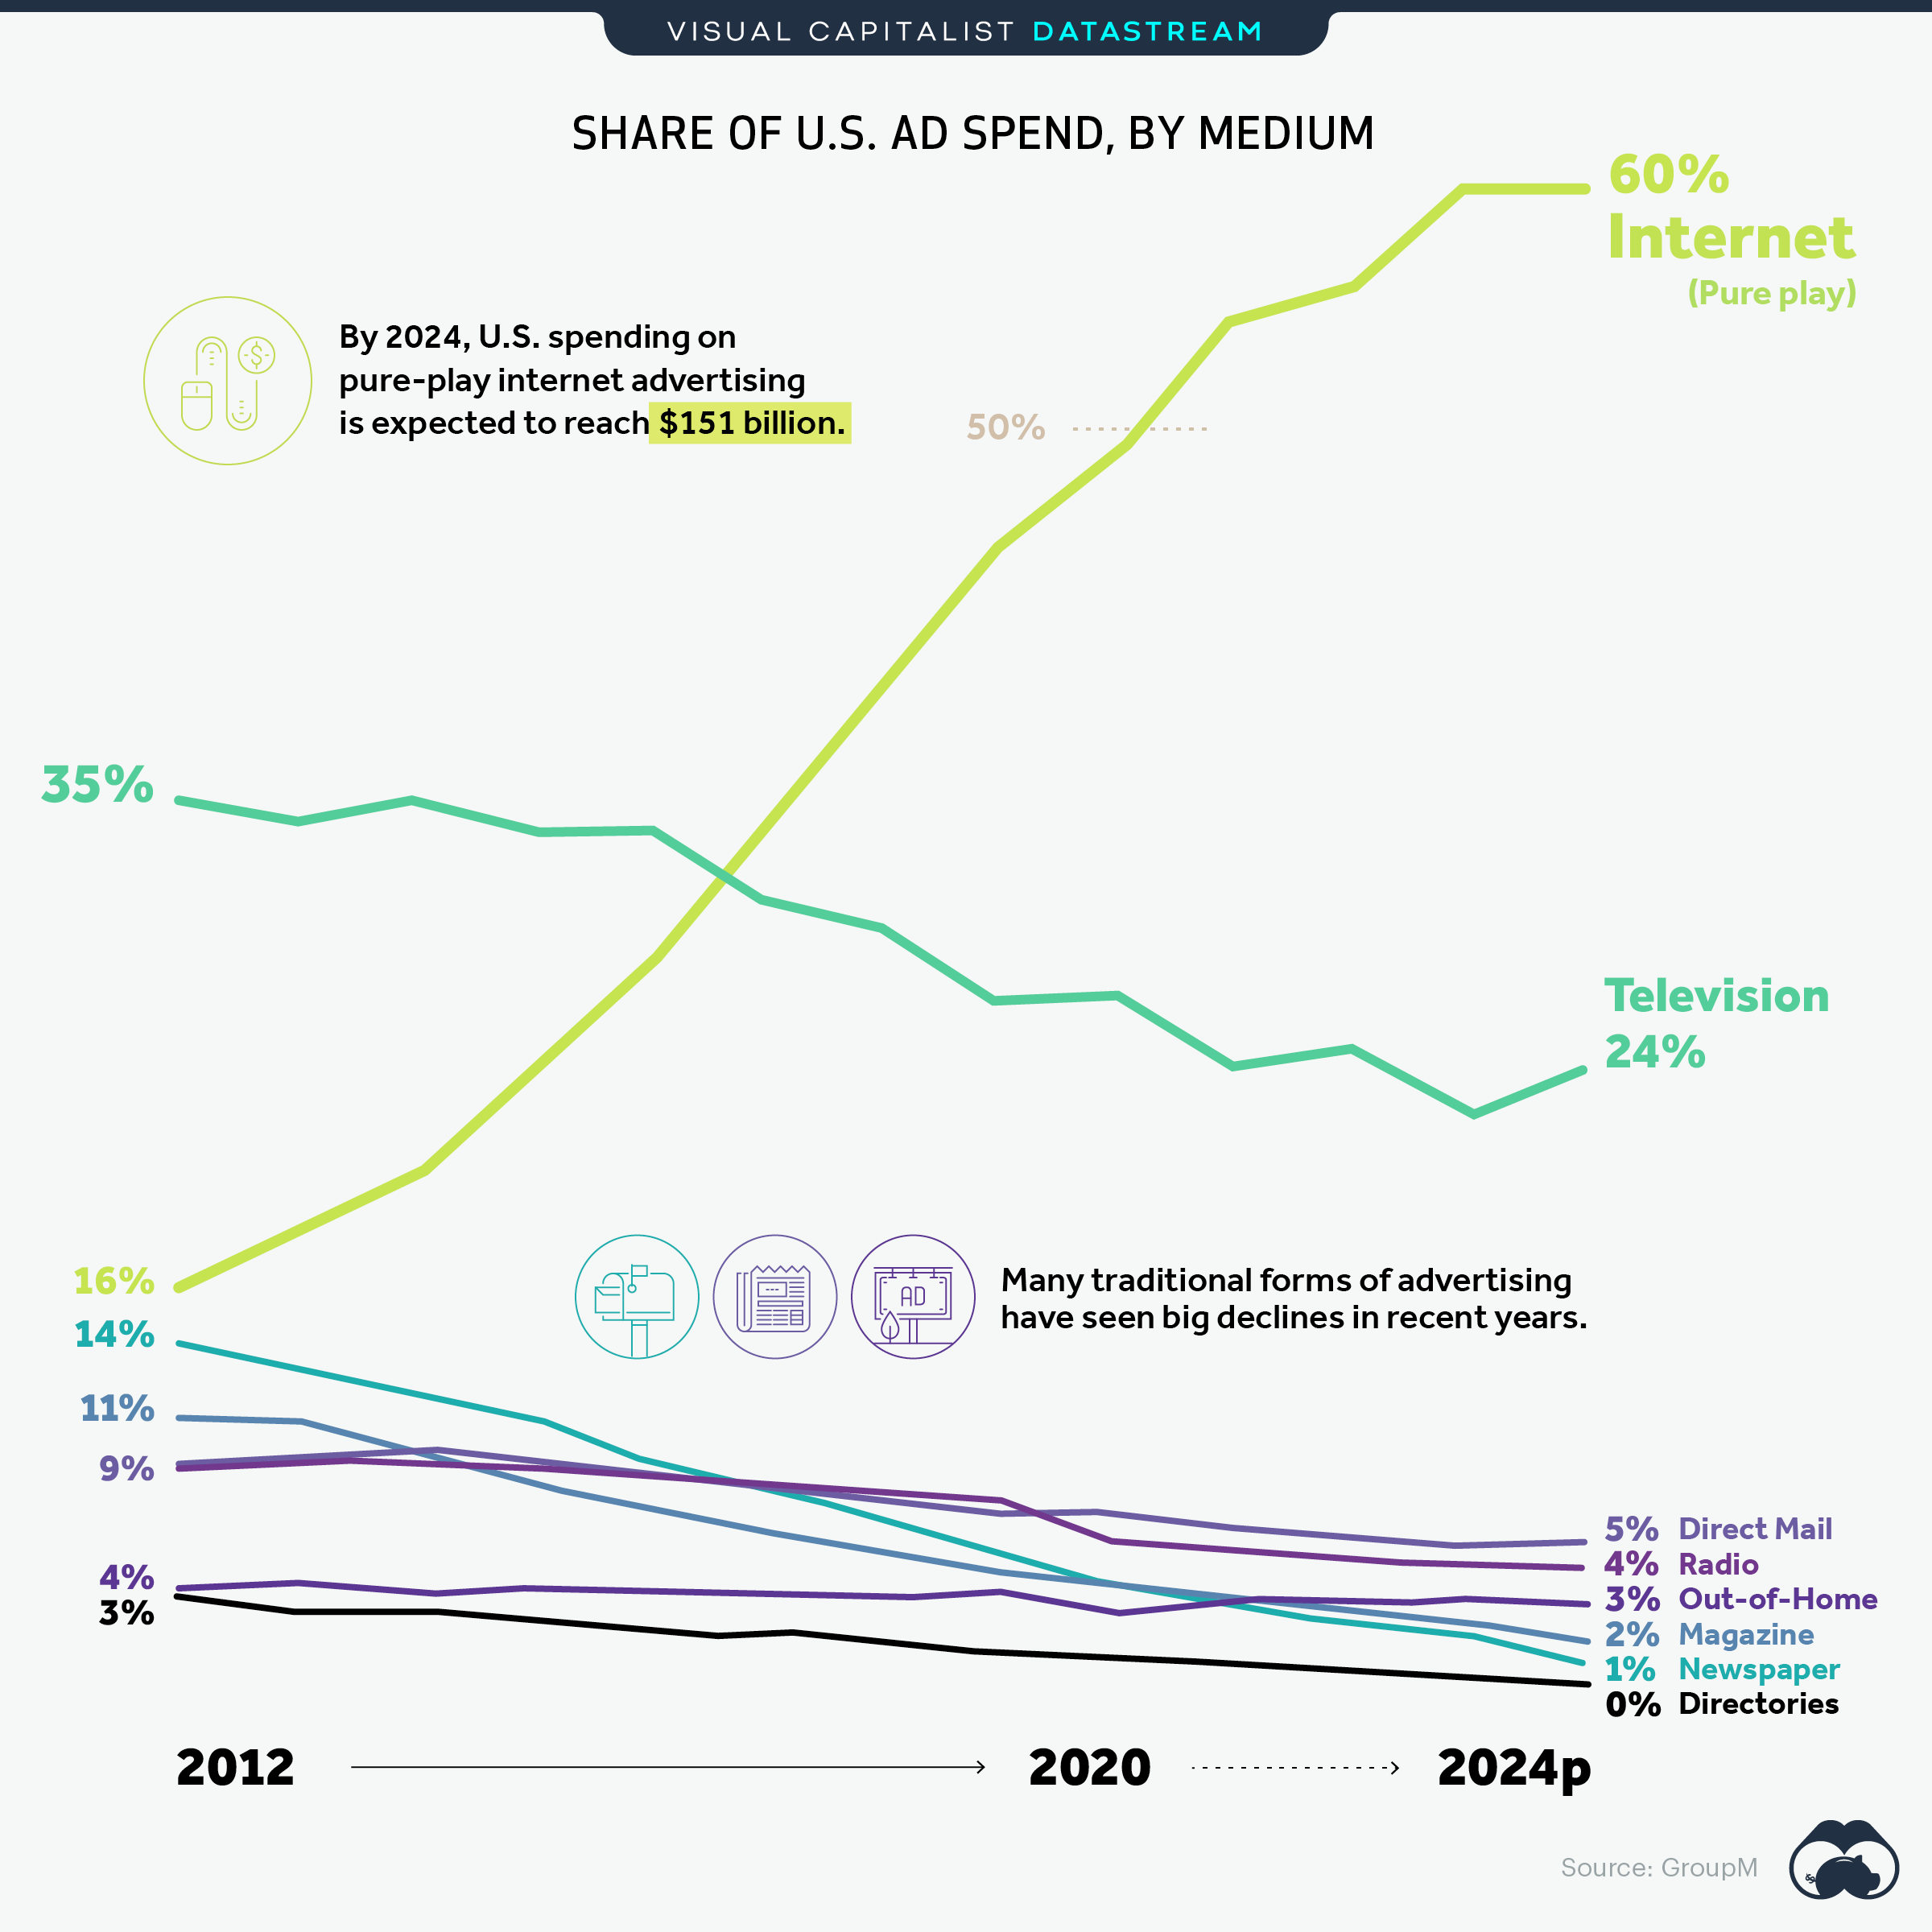 The Majority of Marketing Dollars are Now Being Spent Online